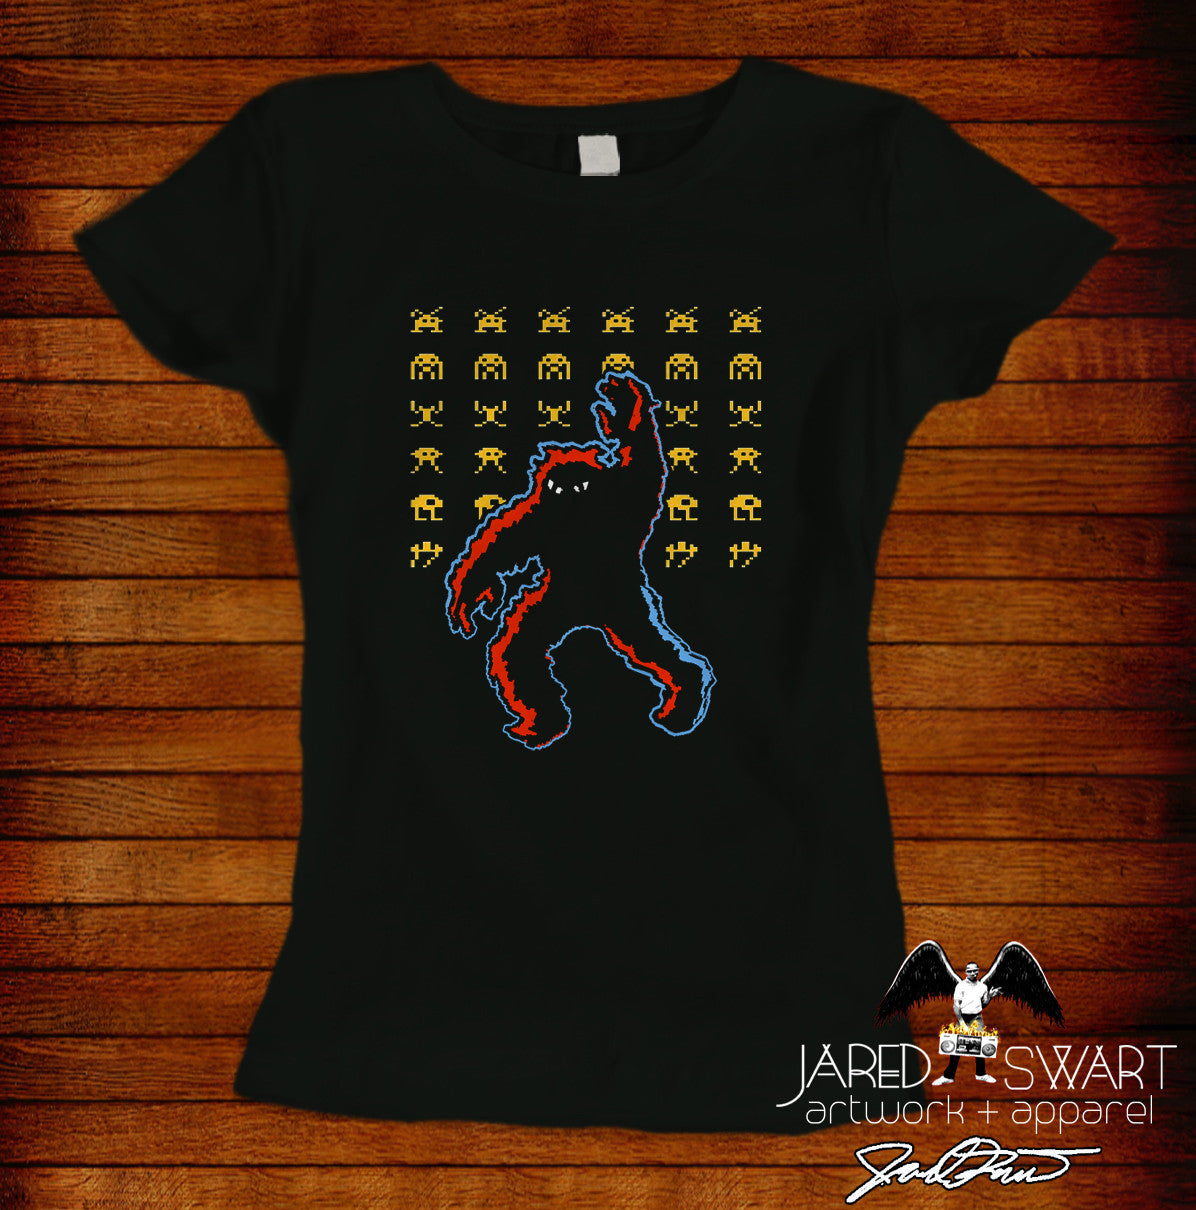 Retro Arcade Game Classic T-shirt Space Invaders